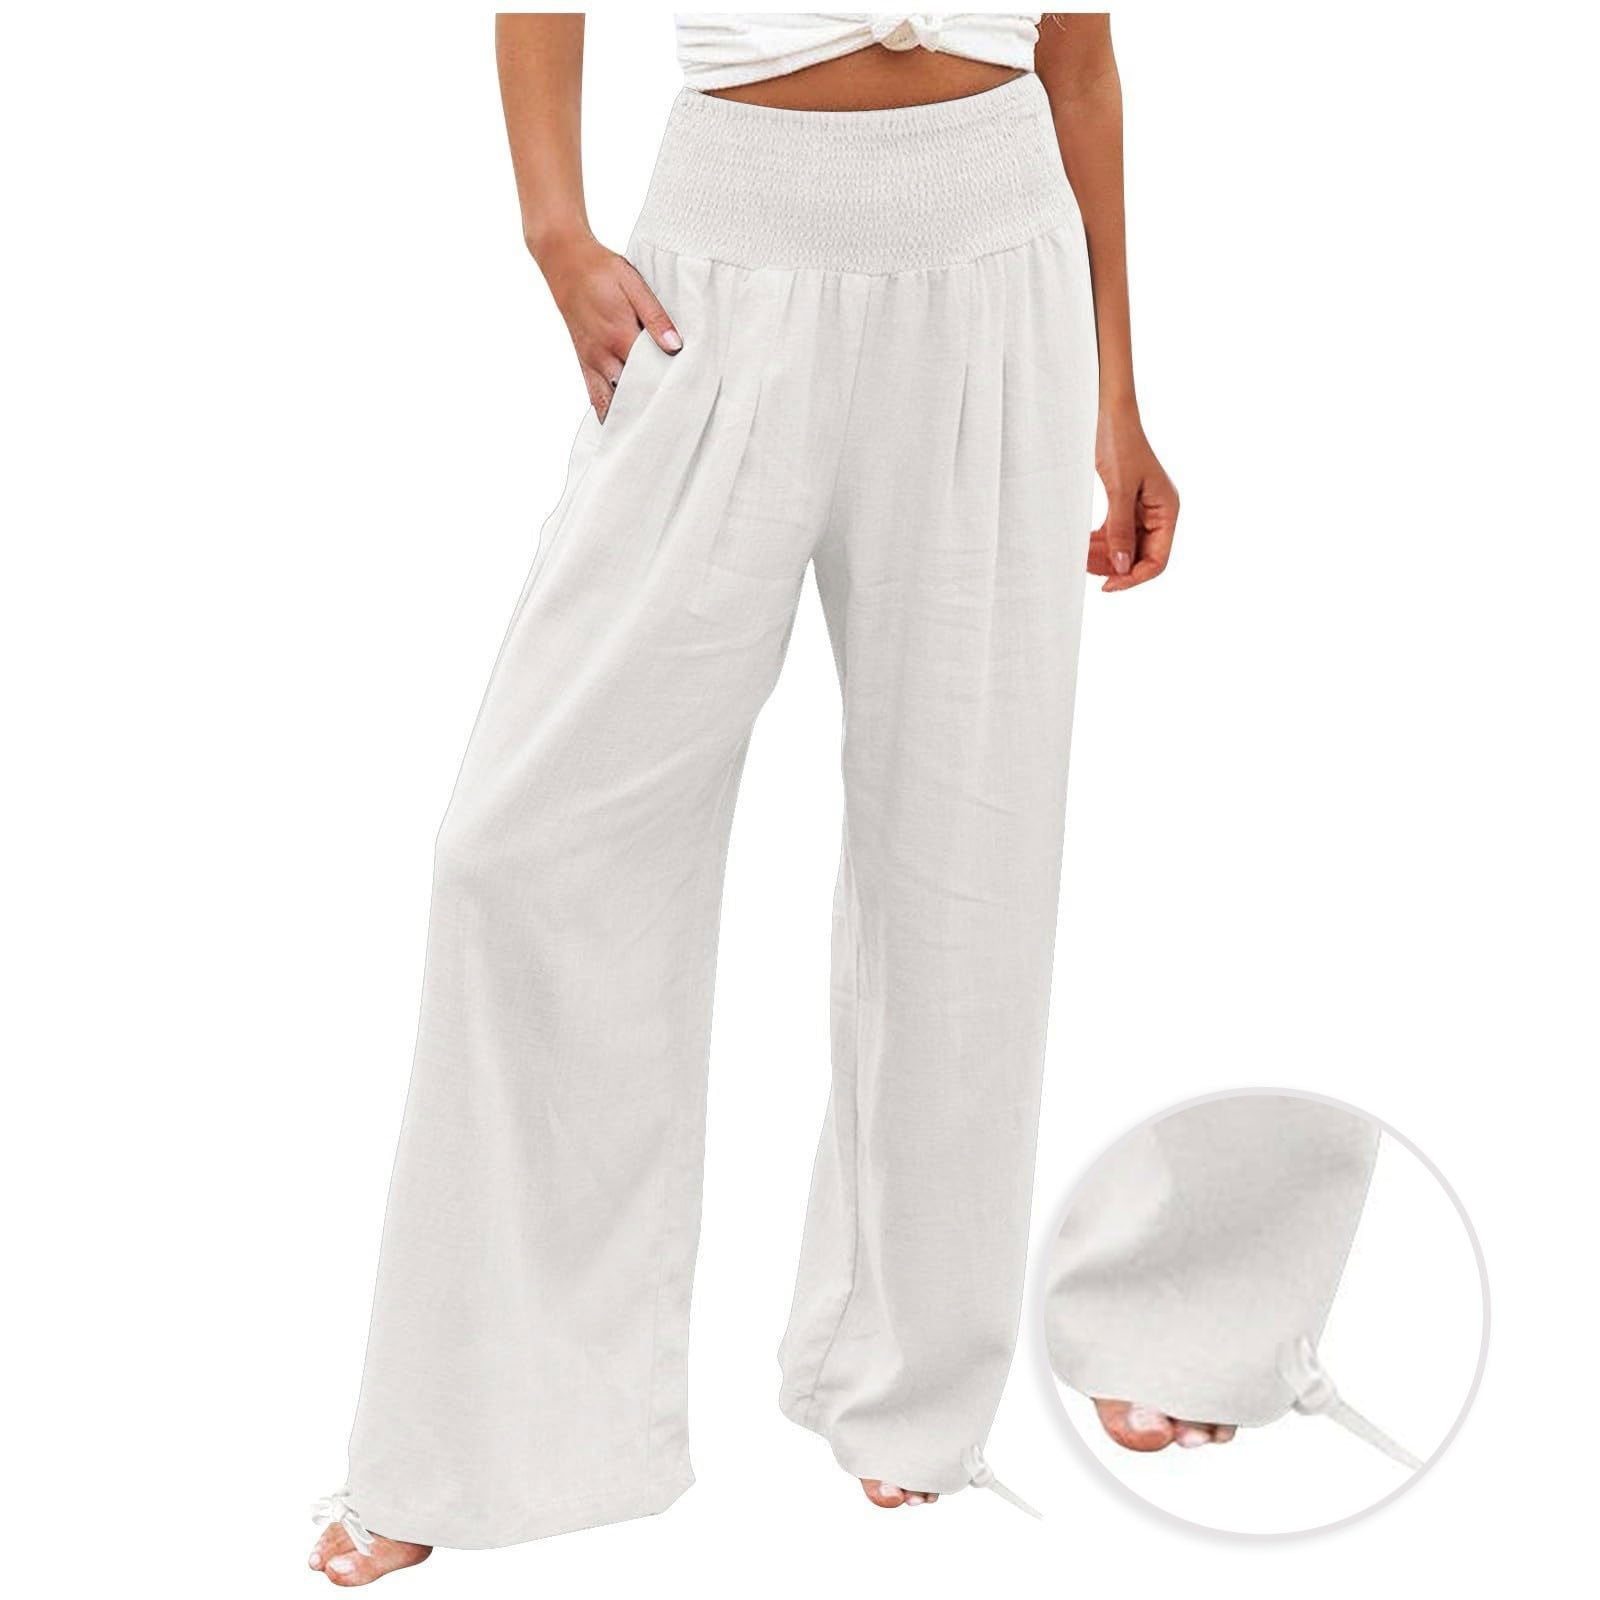 Fashion (white 3)Cotton Linen Pants Women Soft Loose Sports Pants Breathable  Slim Ankle Length Trousers Korean Leisure Fitness Pants WEF @ Best Price  Online